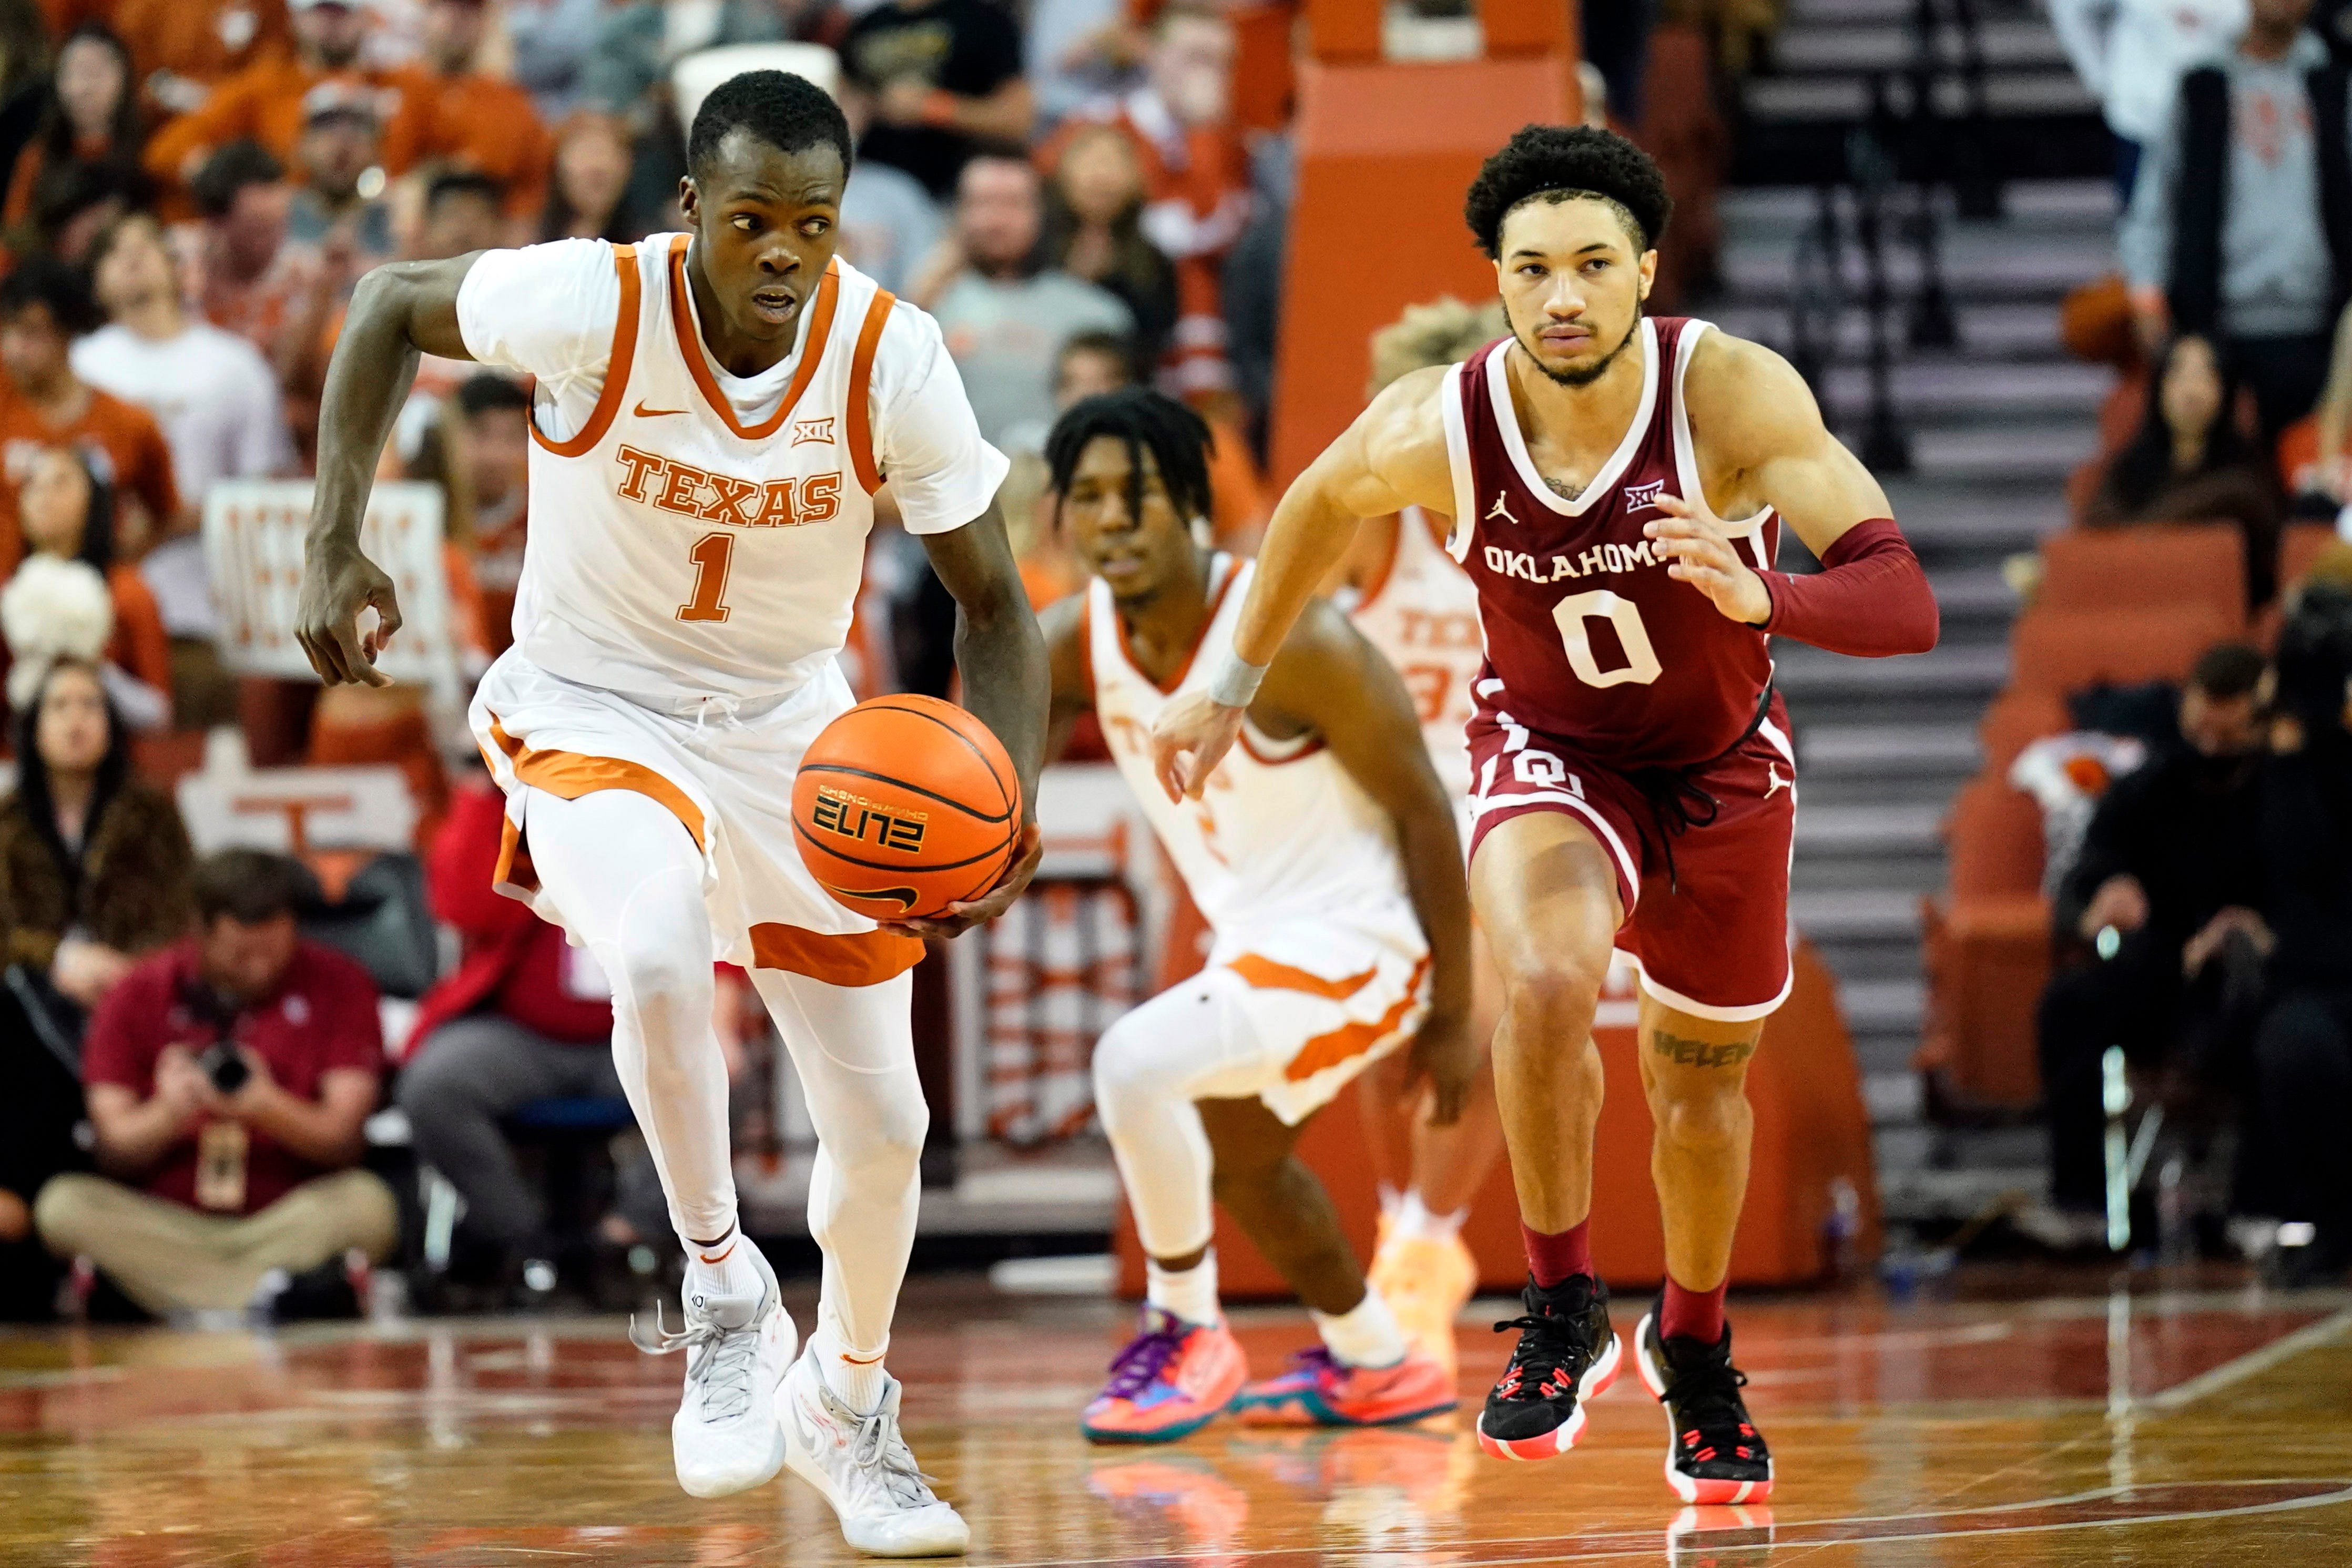 'It was not a good night': Longhorns' defense stifles Sooners in Porter Moser's Red River Rivalry debut